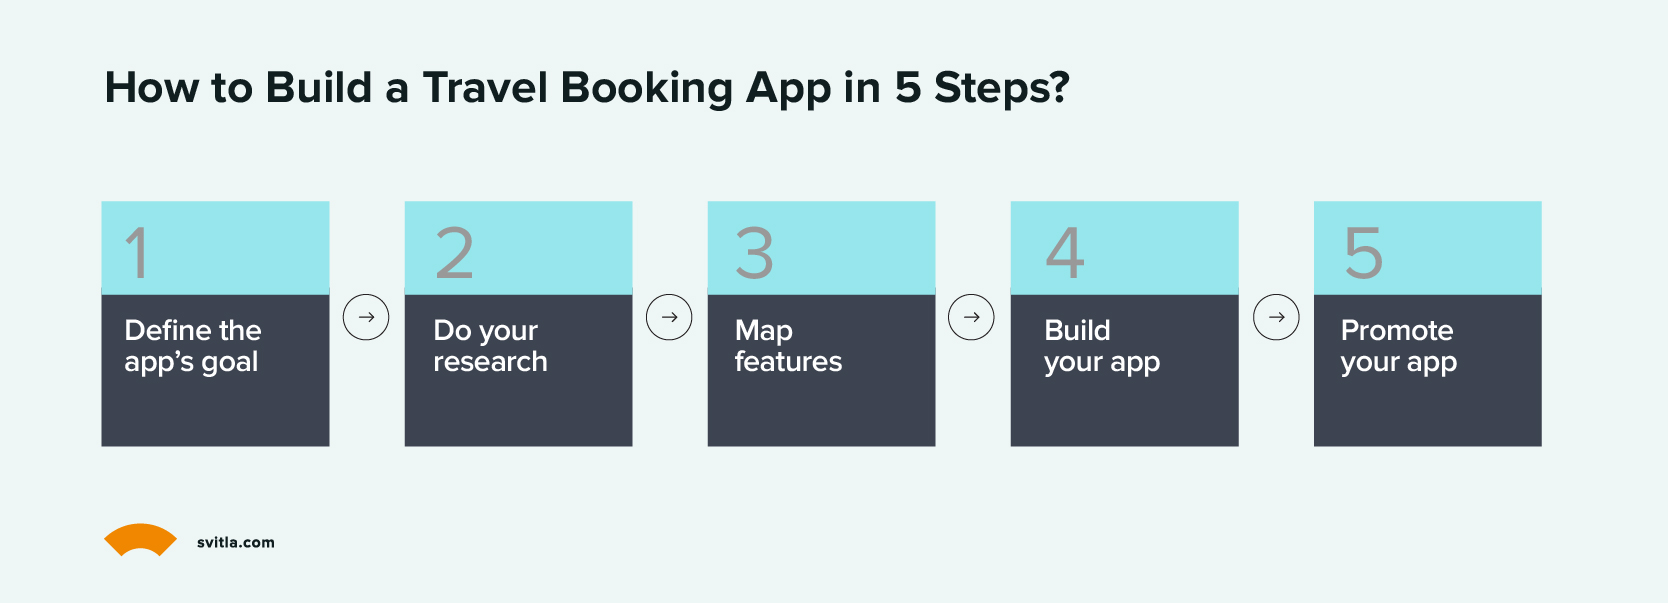 How to Build a Travel Booking App in 5 Steps?